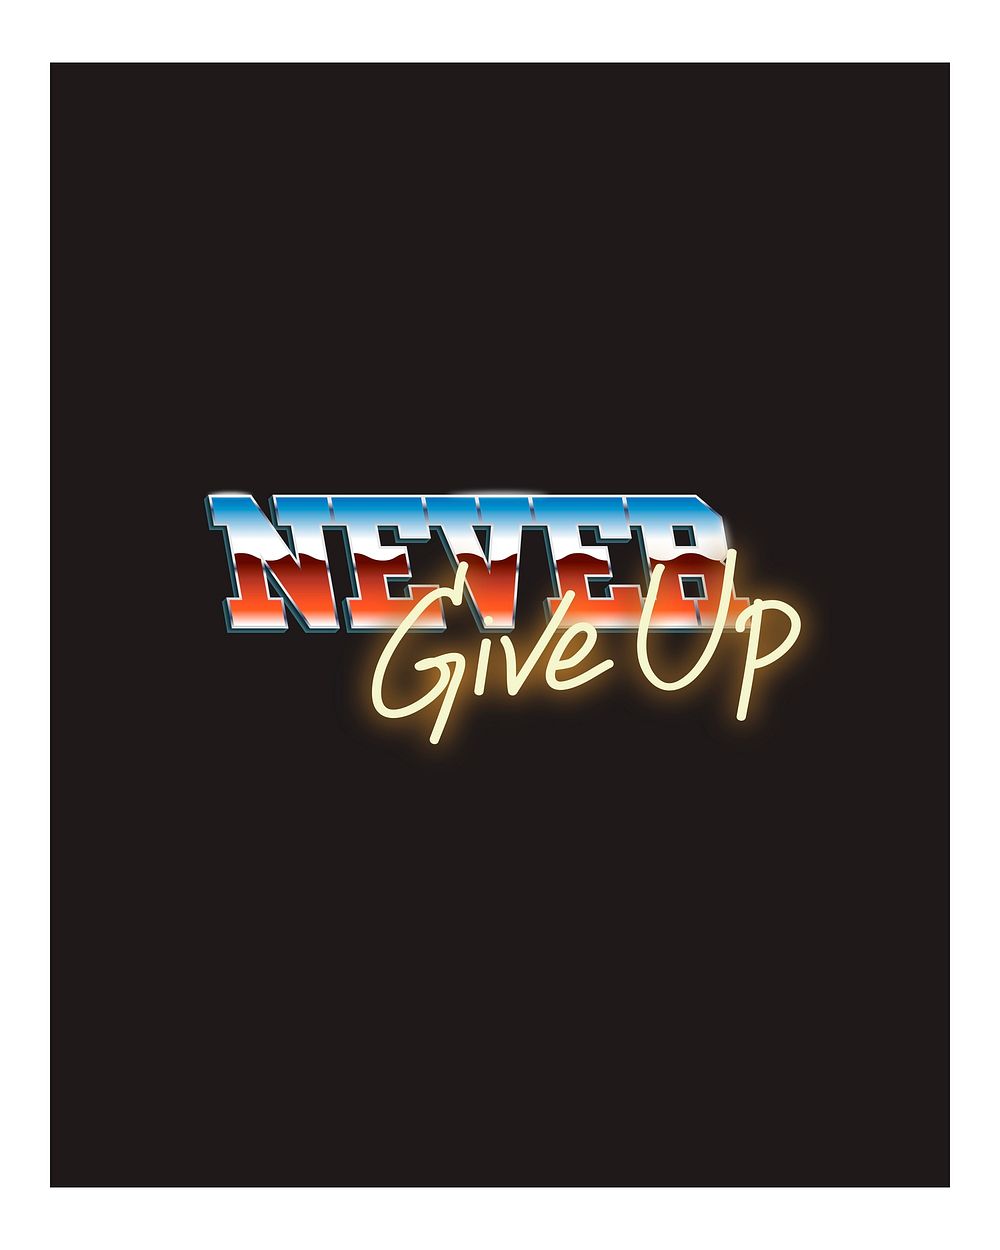 Never give up illustration wall art print and poster.